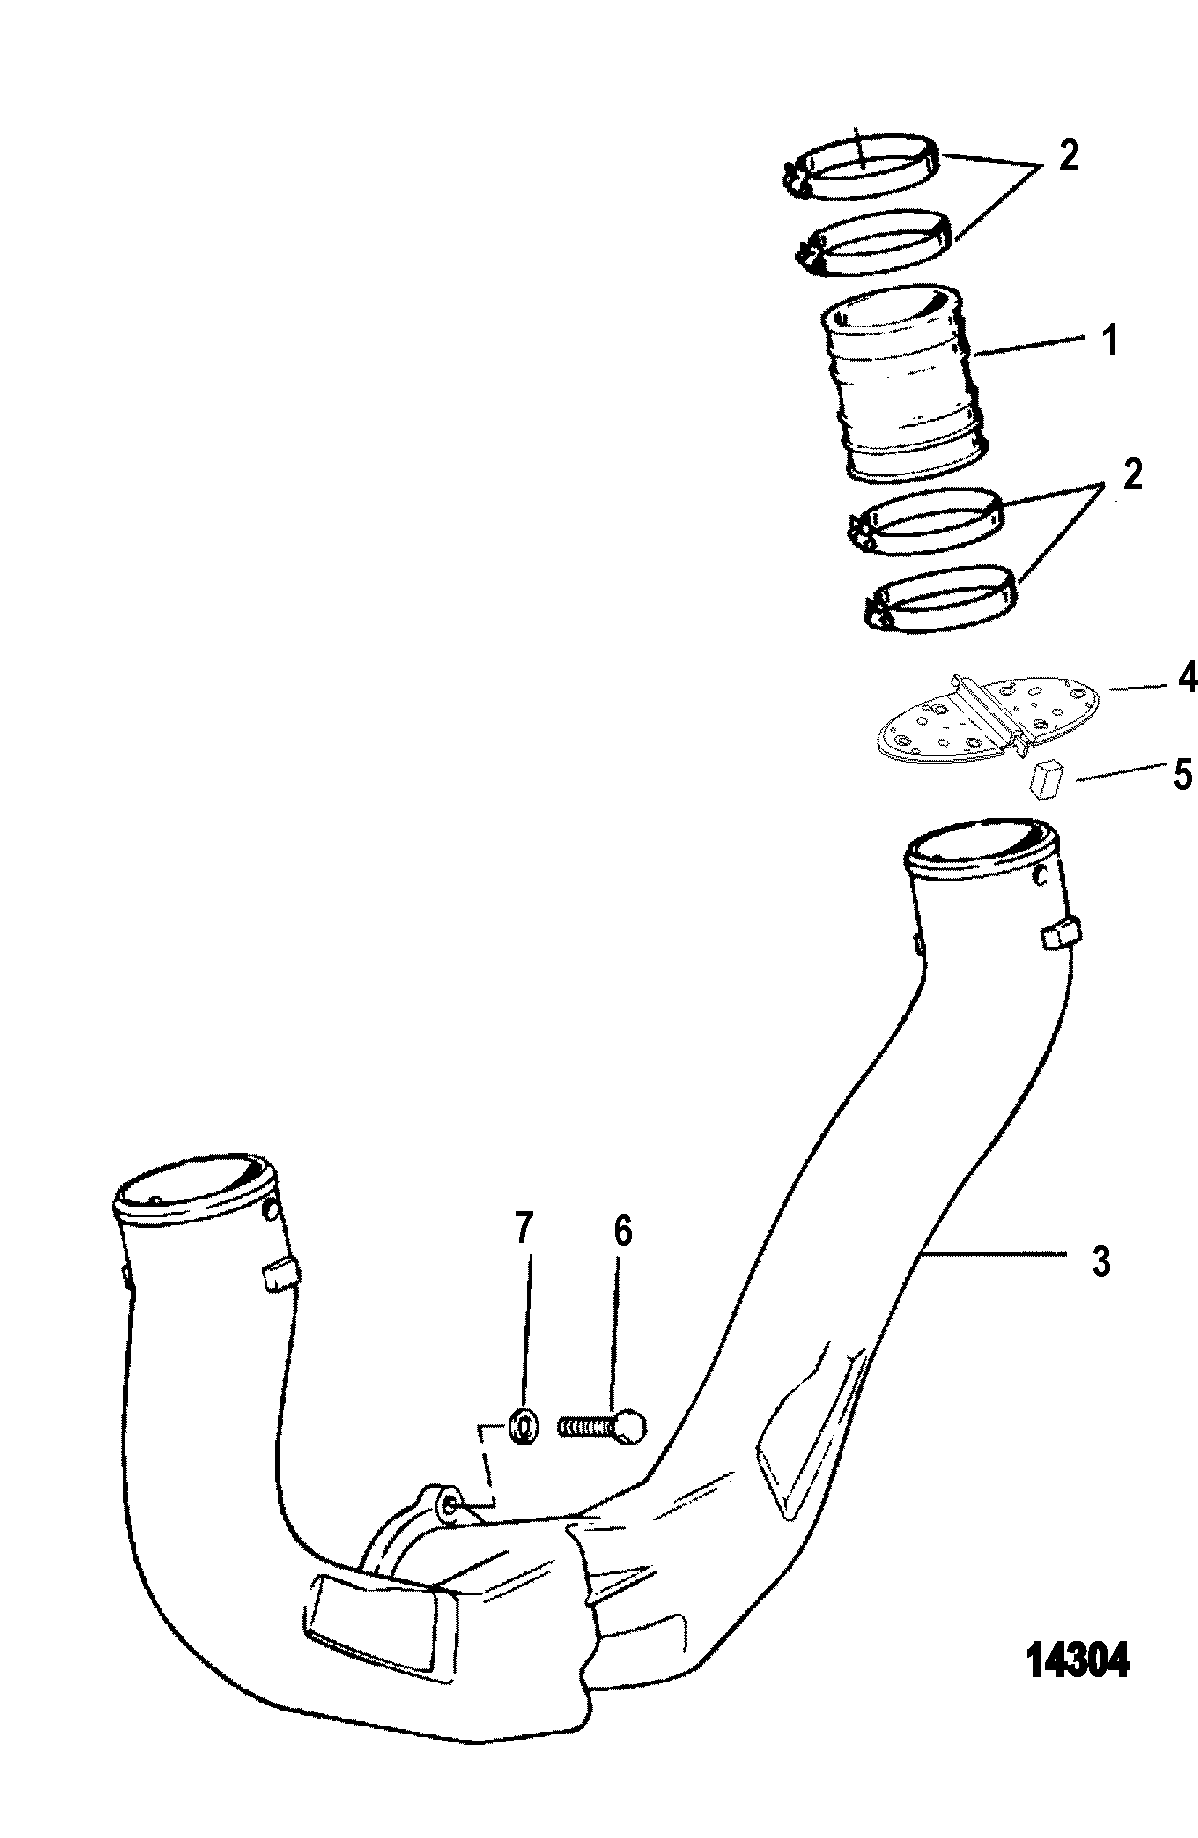 EXHAUST SYSTEM(USE WITH 1 PIECE MANIFOLD)